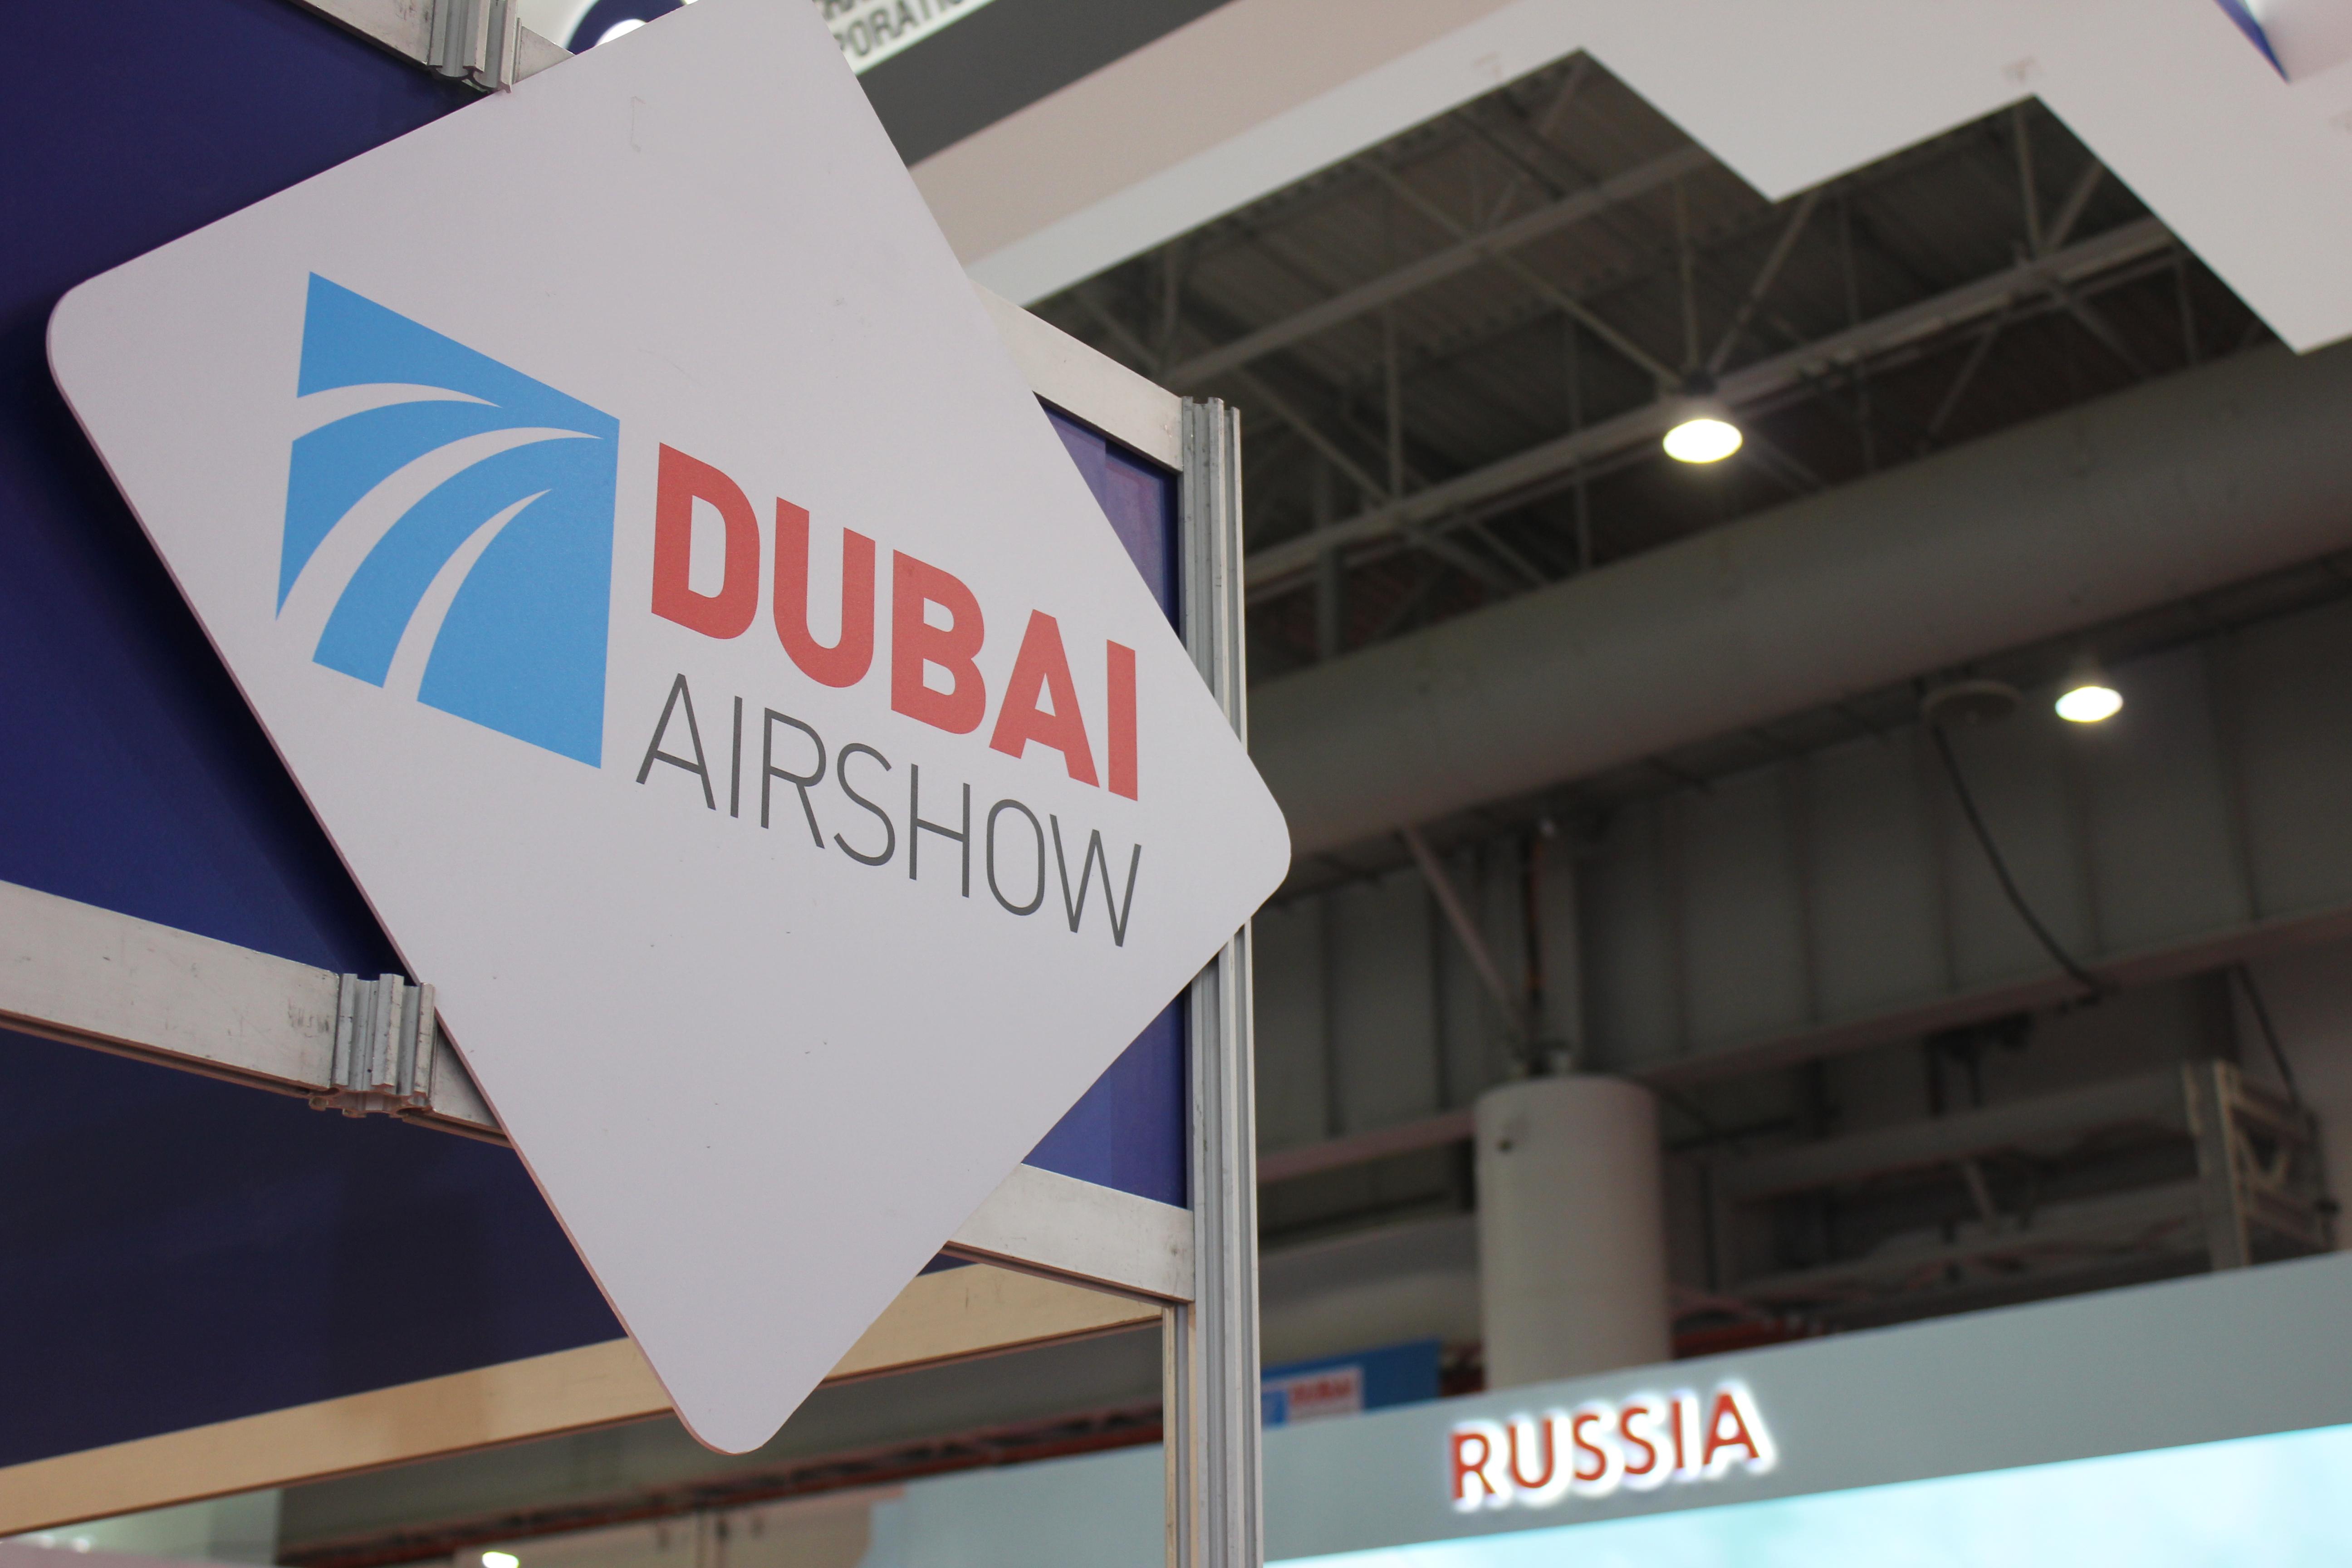 Dubai, UAE - November 17, 2019: A scene at Dubai Airshow 2019, with 1,300 exhibitors from the global aerospace industry showcasing their latest innovations to 87,000 trade visitors over 5 days at DWC.